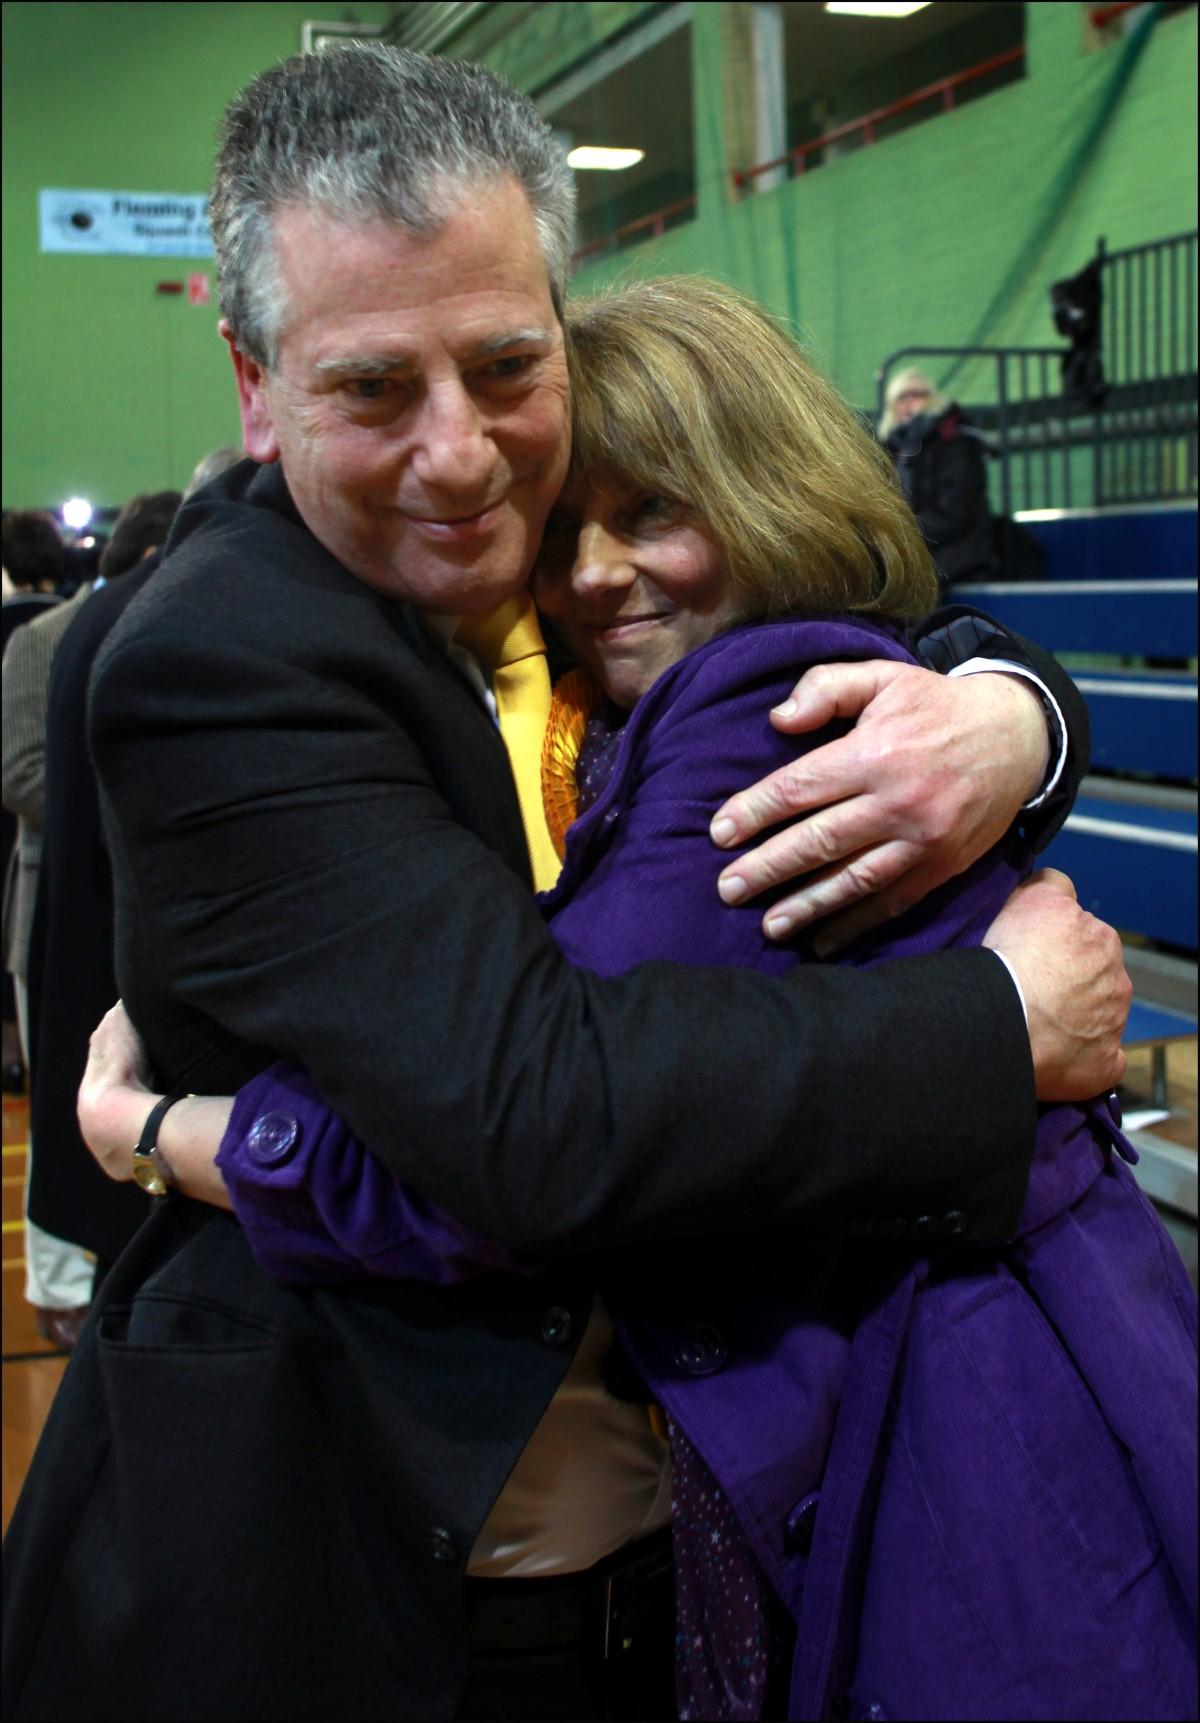 The Year in Pictures - 2013 - Liberal Democrat Mike Thornton celebrated victory with his wife Peta at the Eastleigh by-election. March 1, 2013.